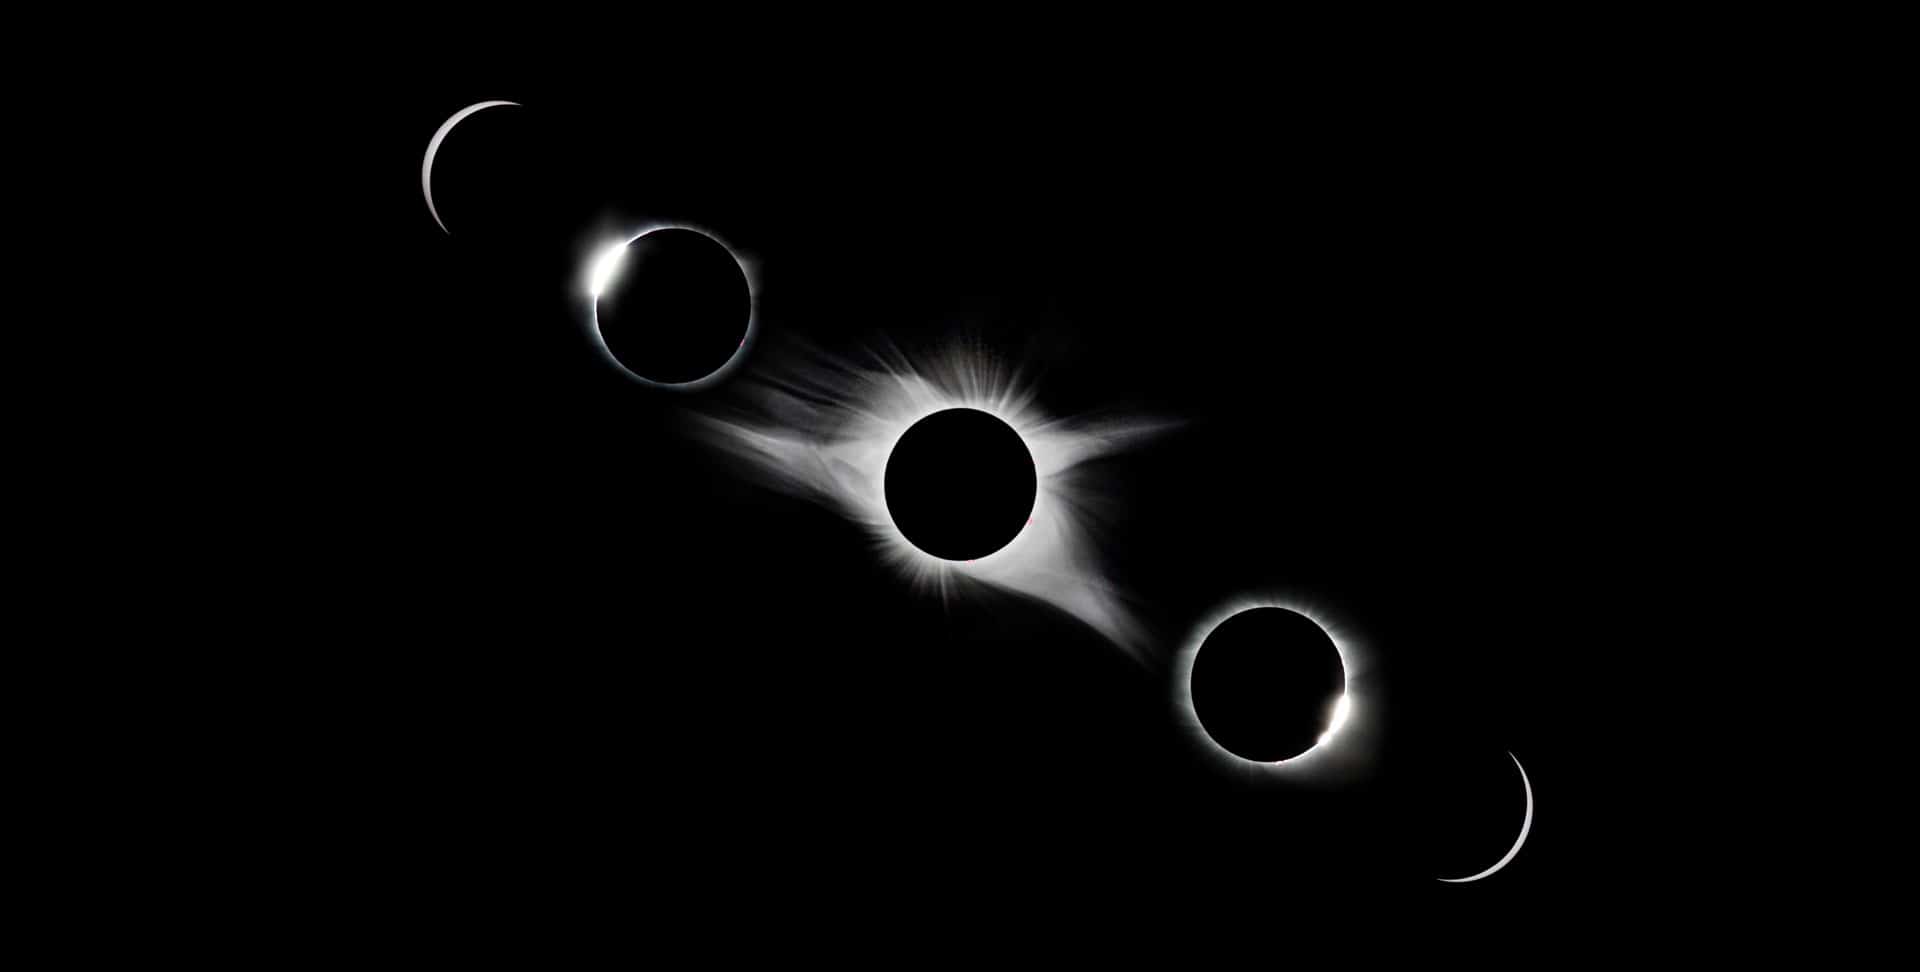 Phases of a solar eclipse against a dark sky, observed as a spiritual phenomenon.